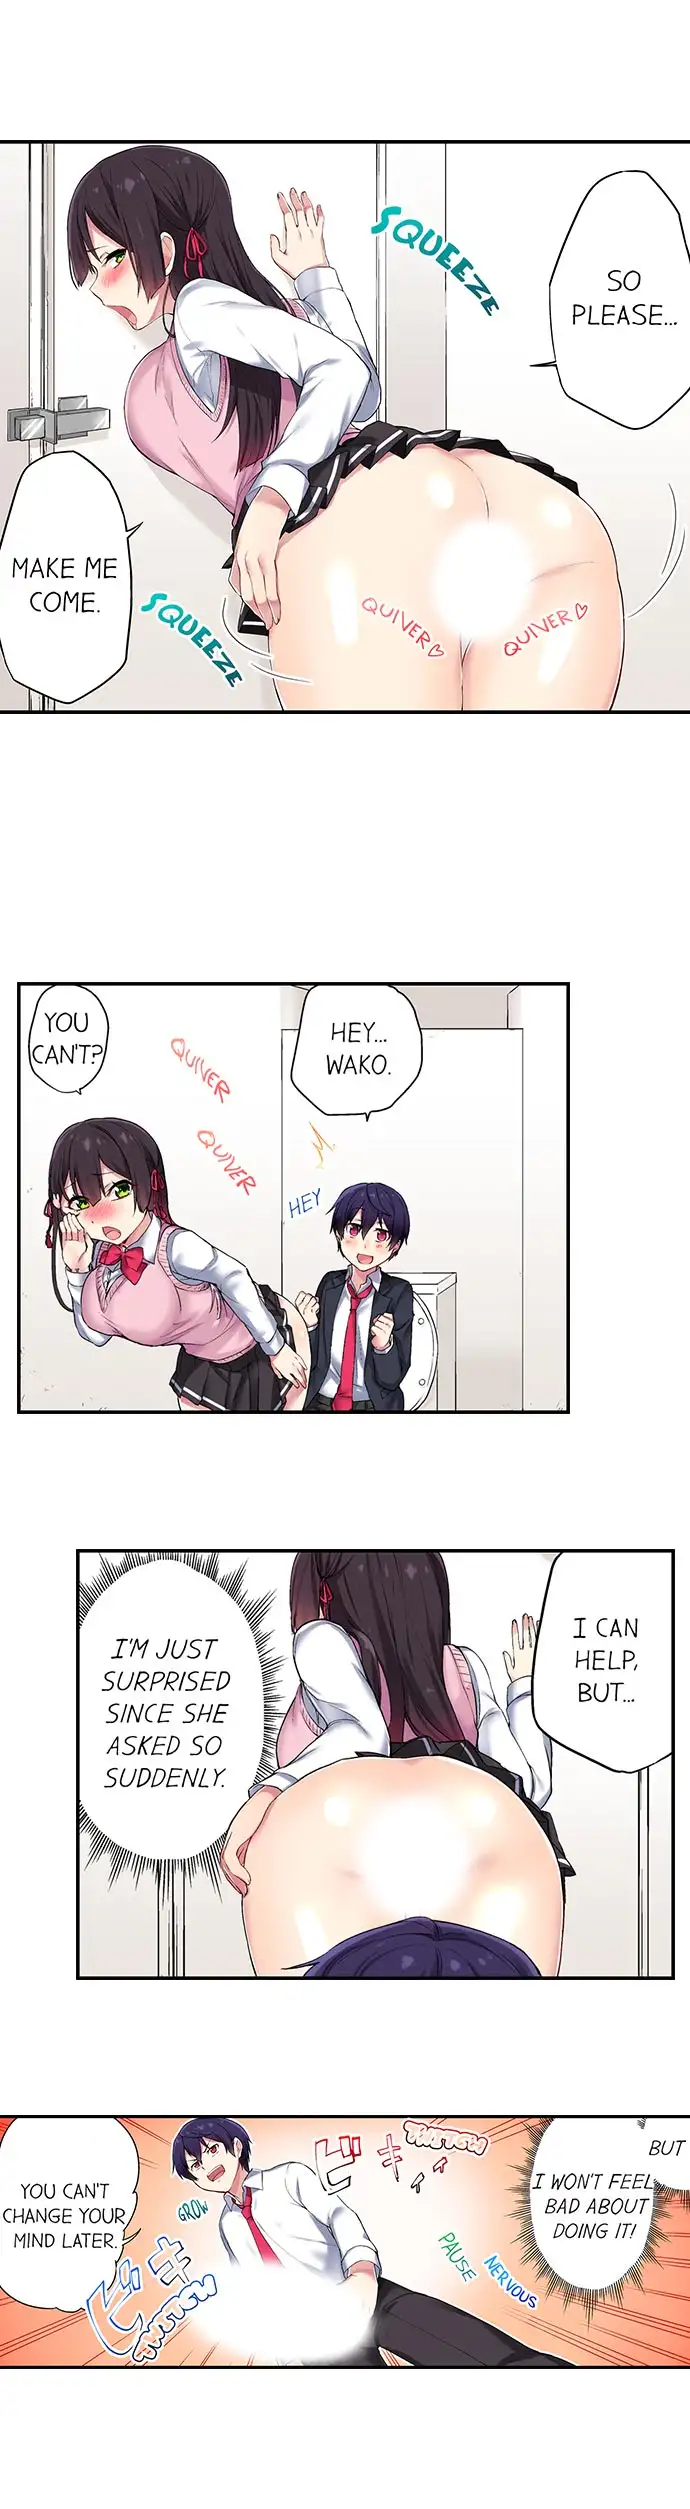 Committee Chairman, Didn’t You Just Masturbate In the Bathroom? I Can See the Number of Times People Orgasm - Chapter 5 Page 4